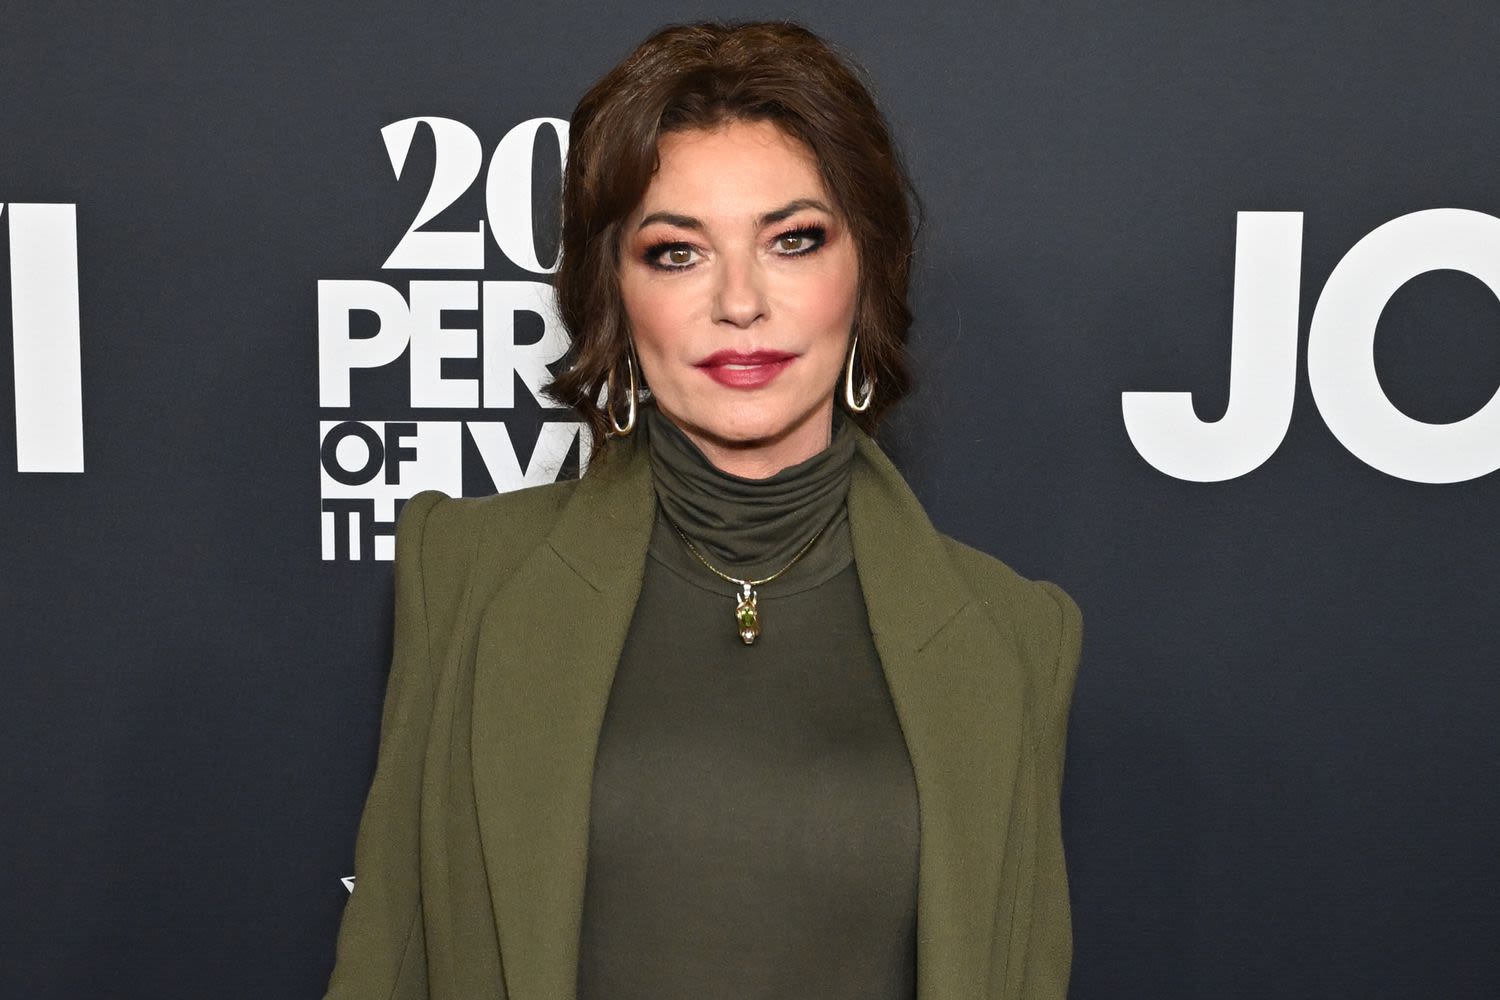 Shania Twain doesn’t hate ex-husband for cheating on her: 'So sad for him'